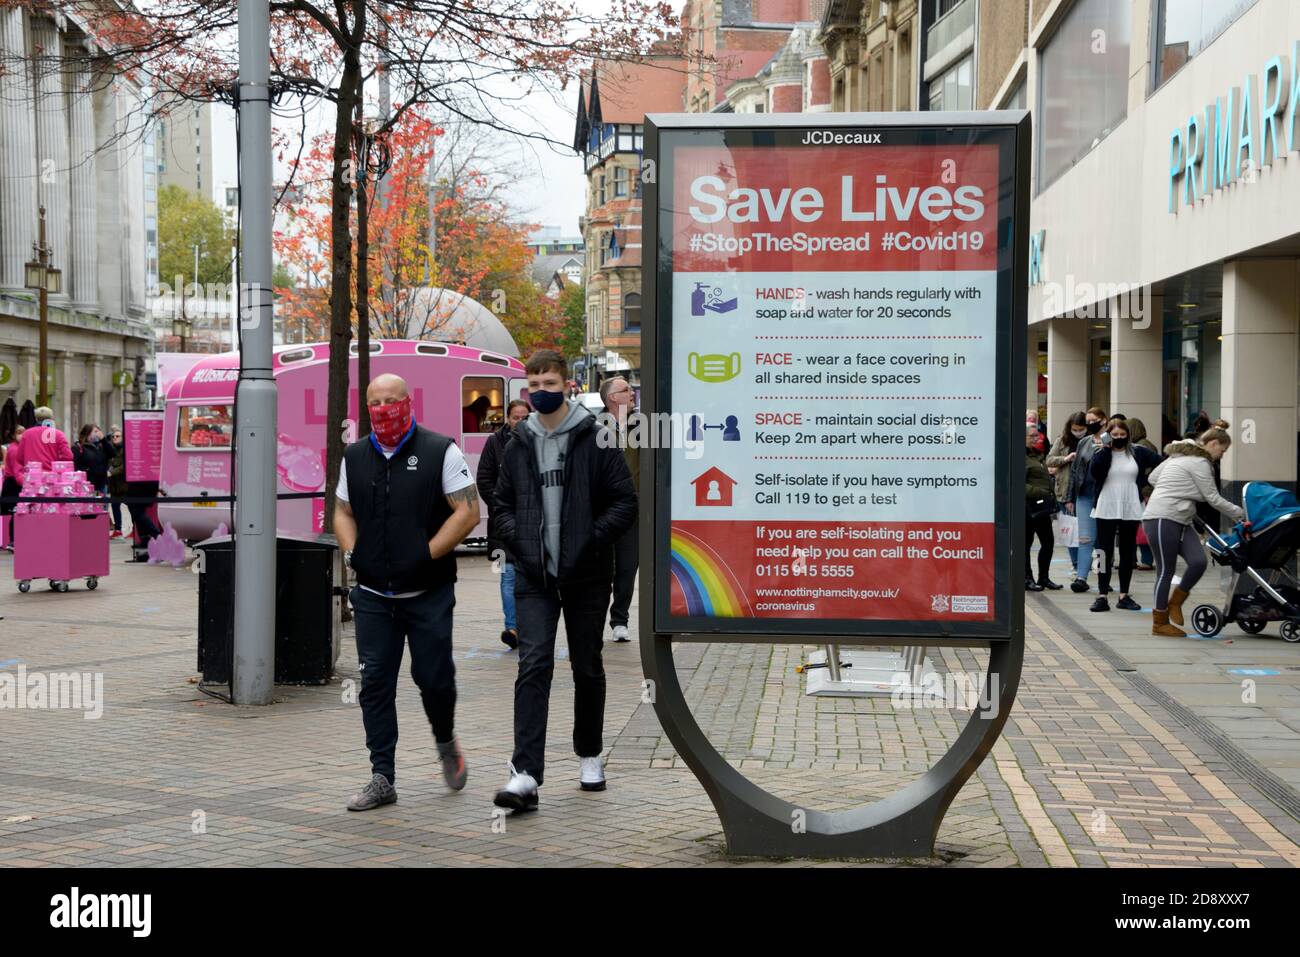 People walk past street sign, 'Save Lives' Stock Photo